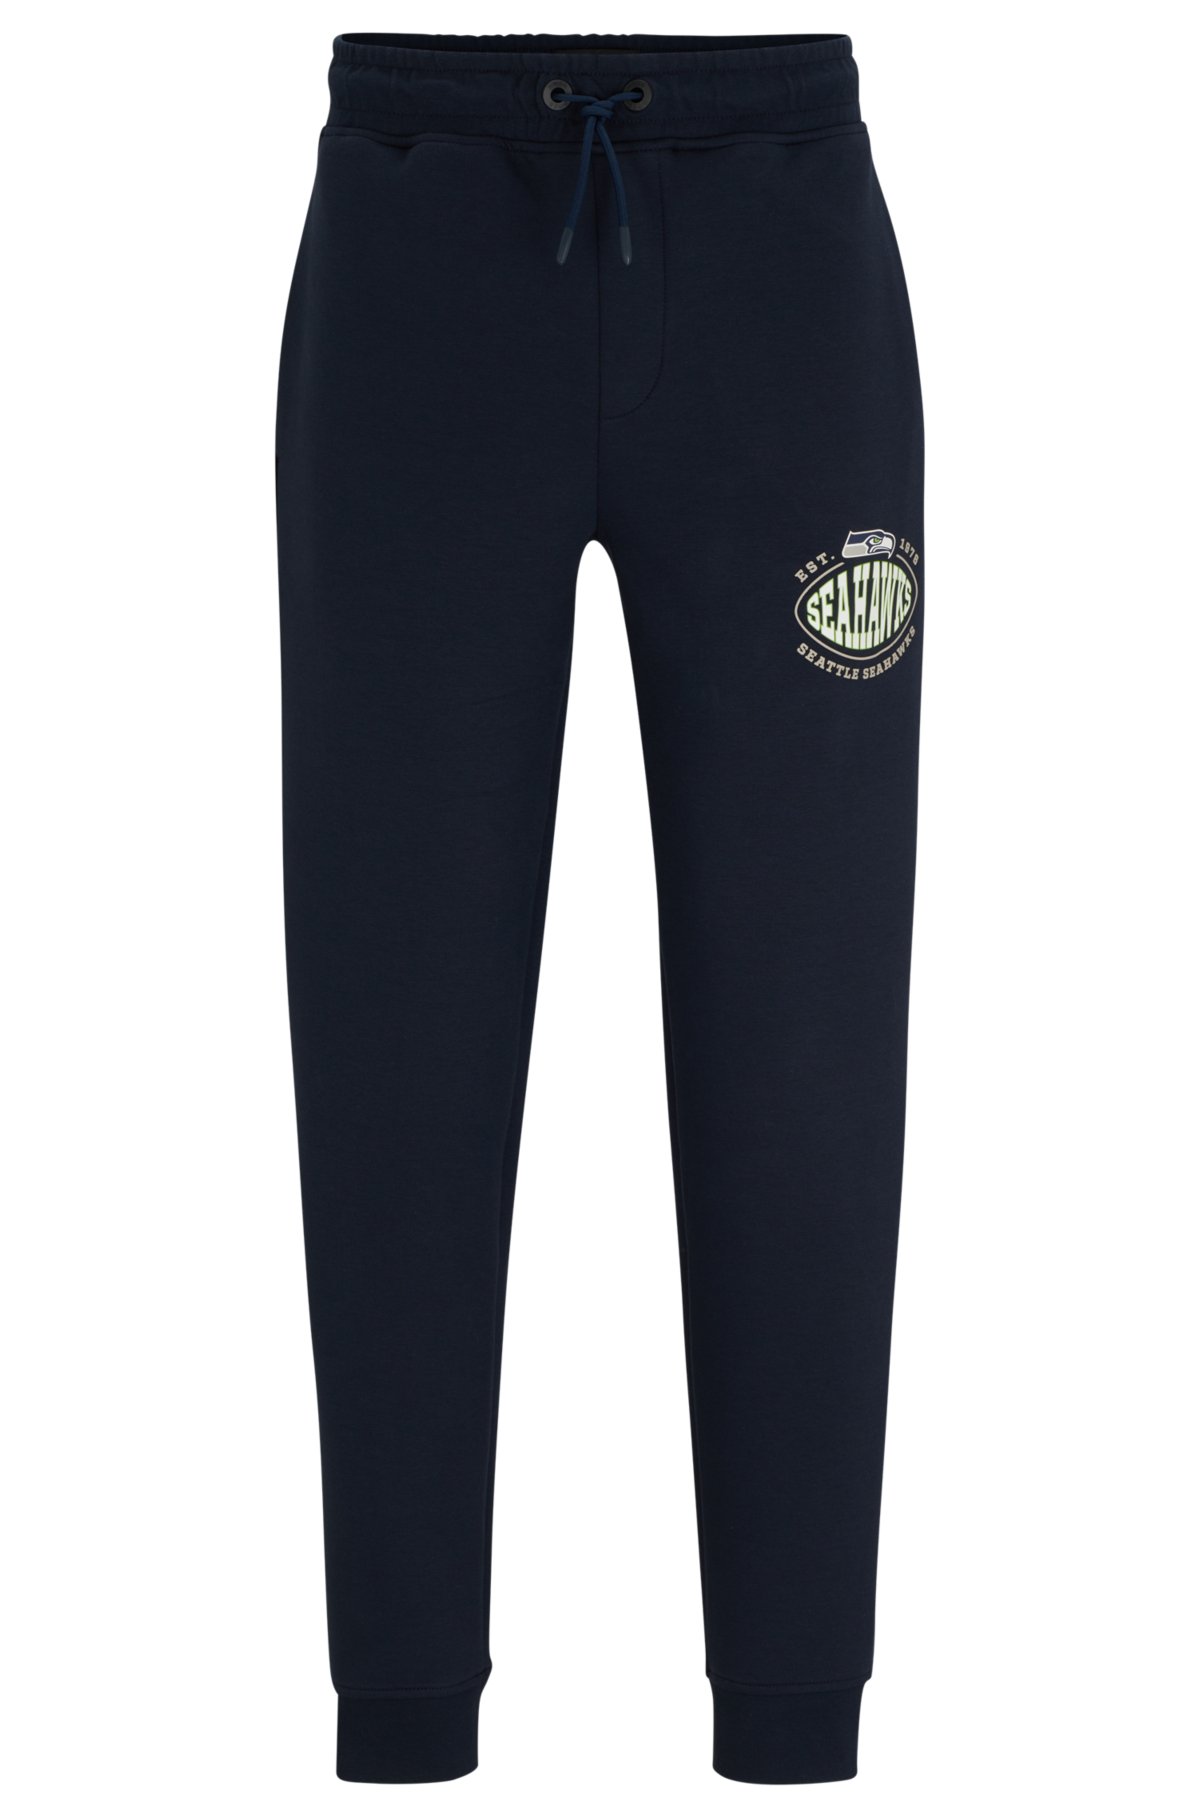 BOSS x NFL cotton-blend tracksuit bottoms with collaborative branding, Seahawks